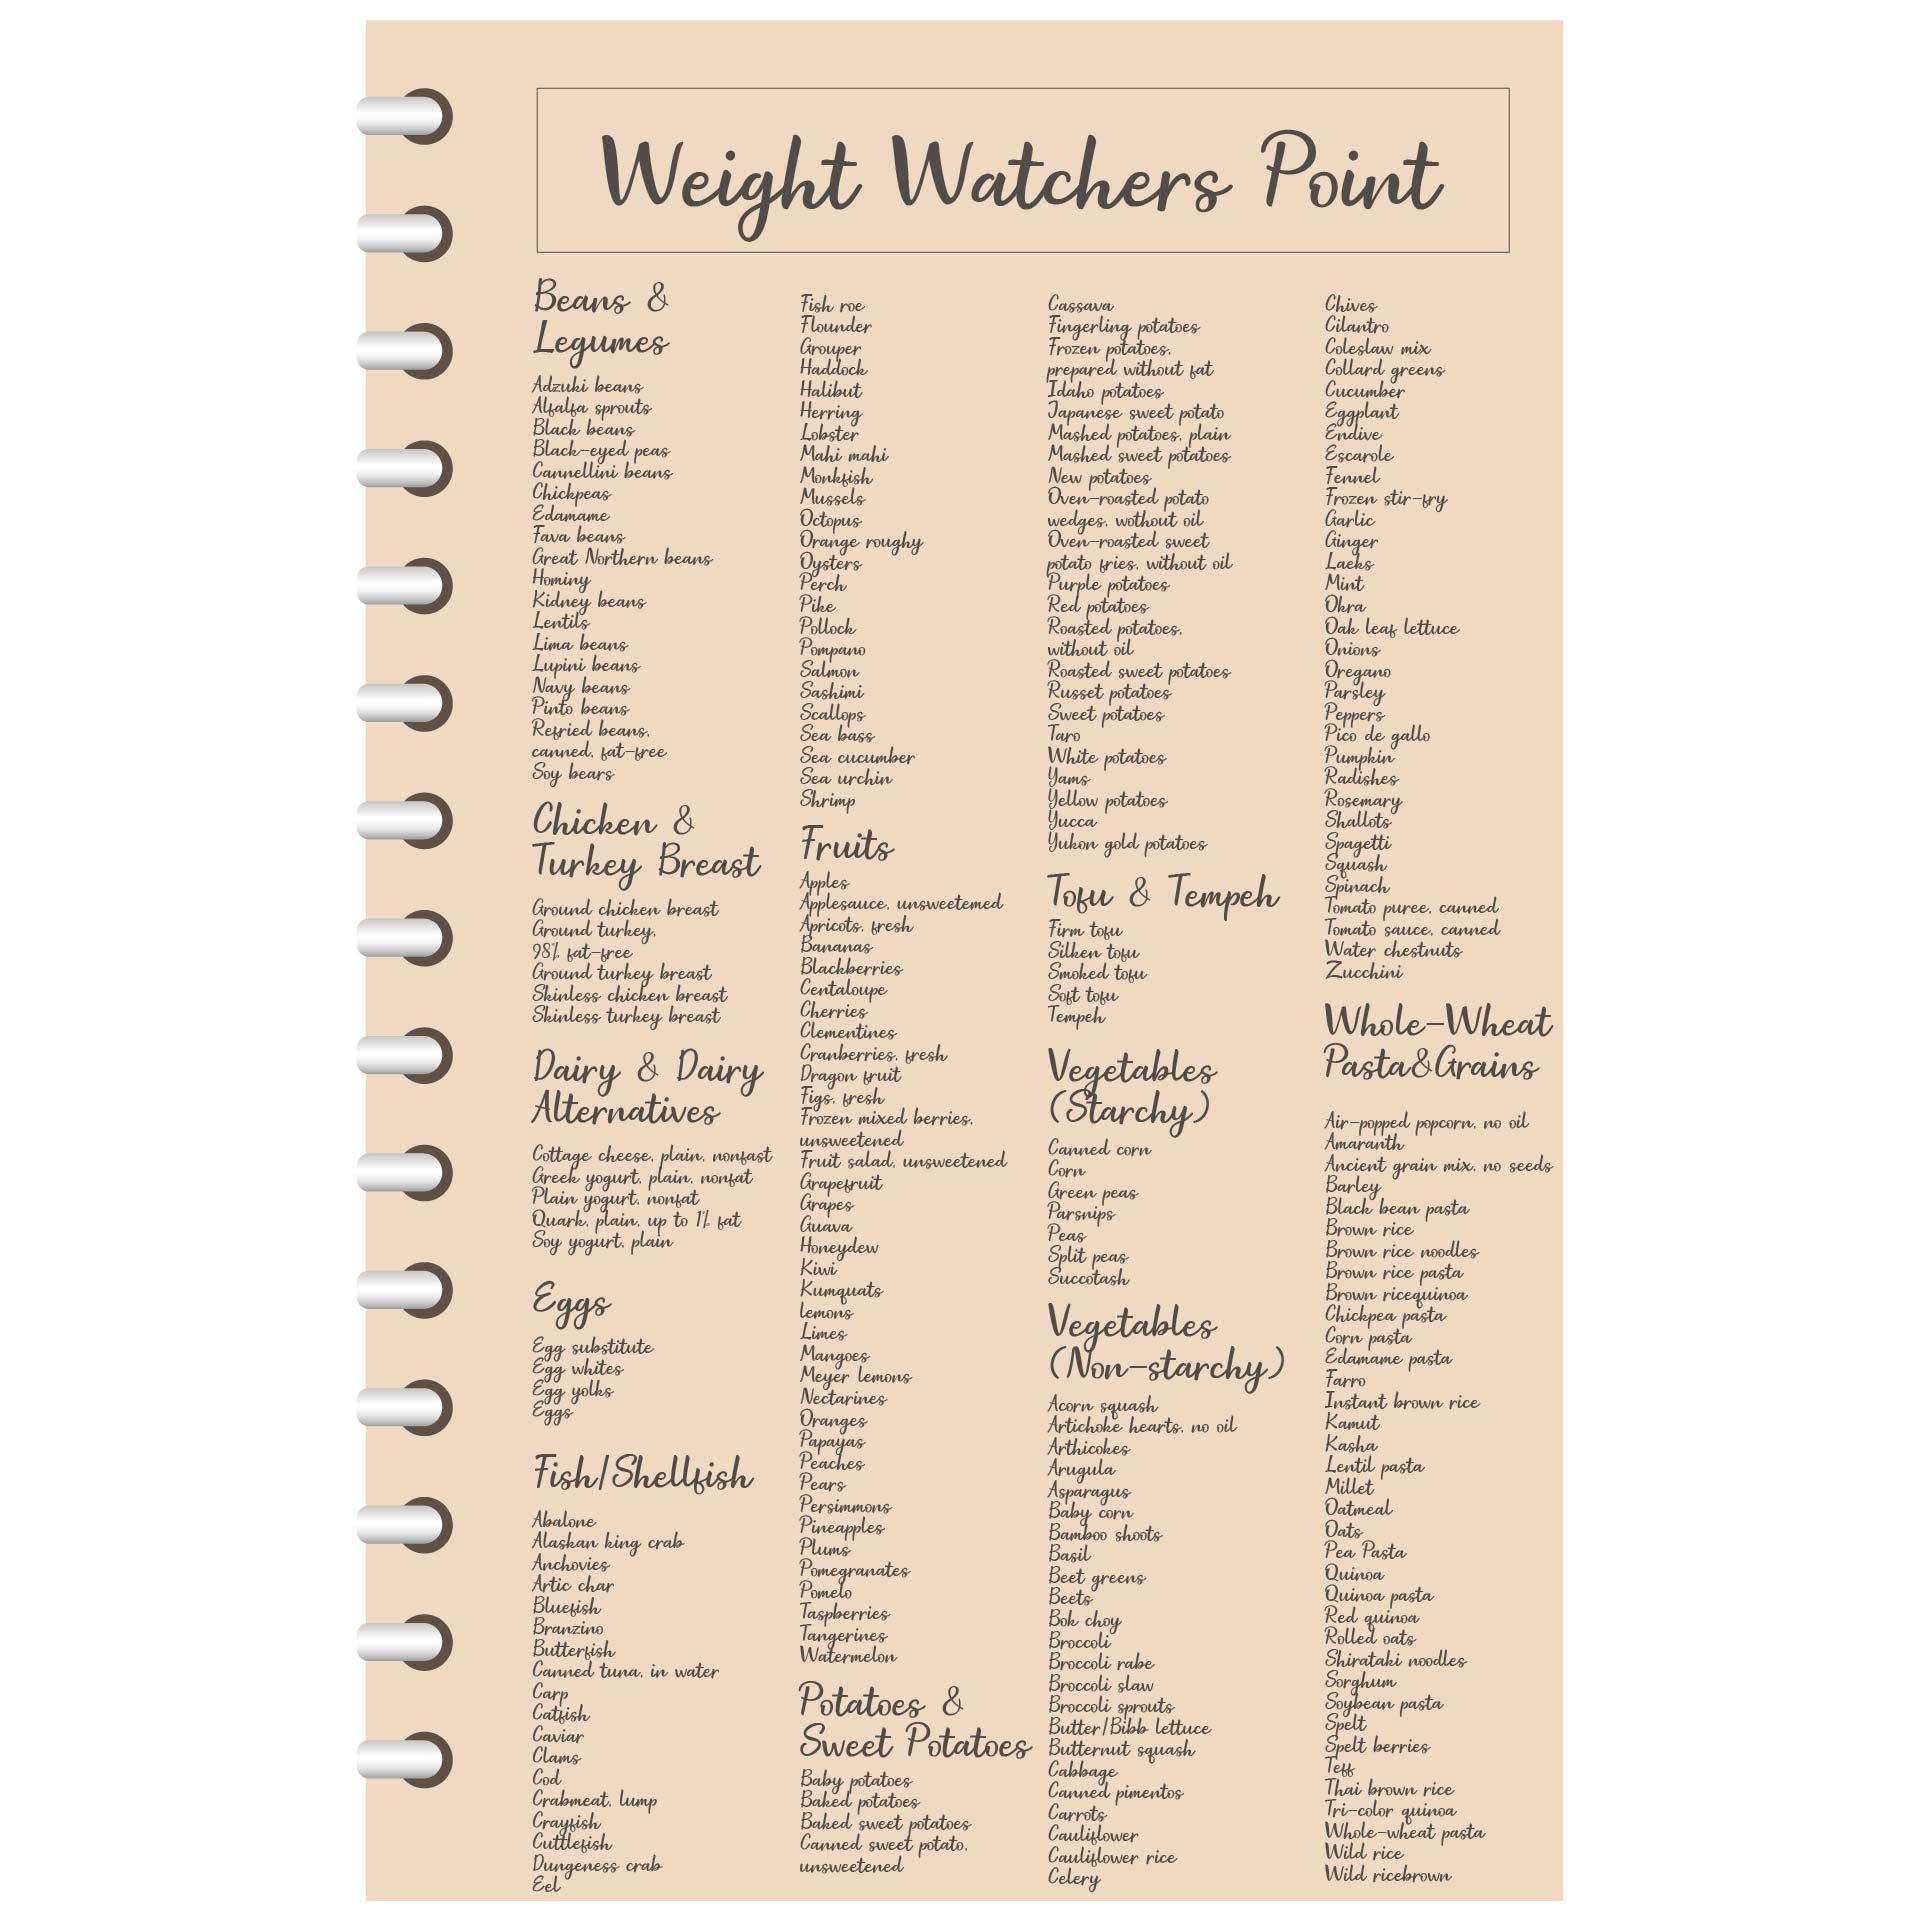 8-best-images-of-weight-watchers-point-book-printable-printable-weight-watchers-points-height